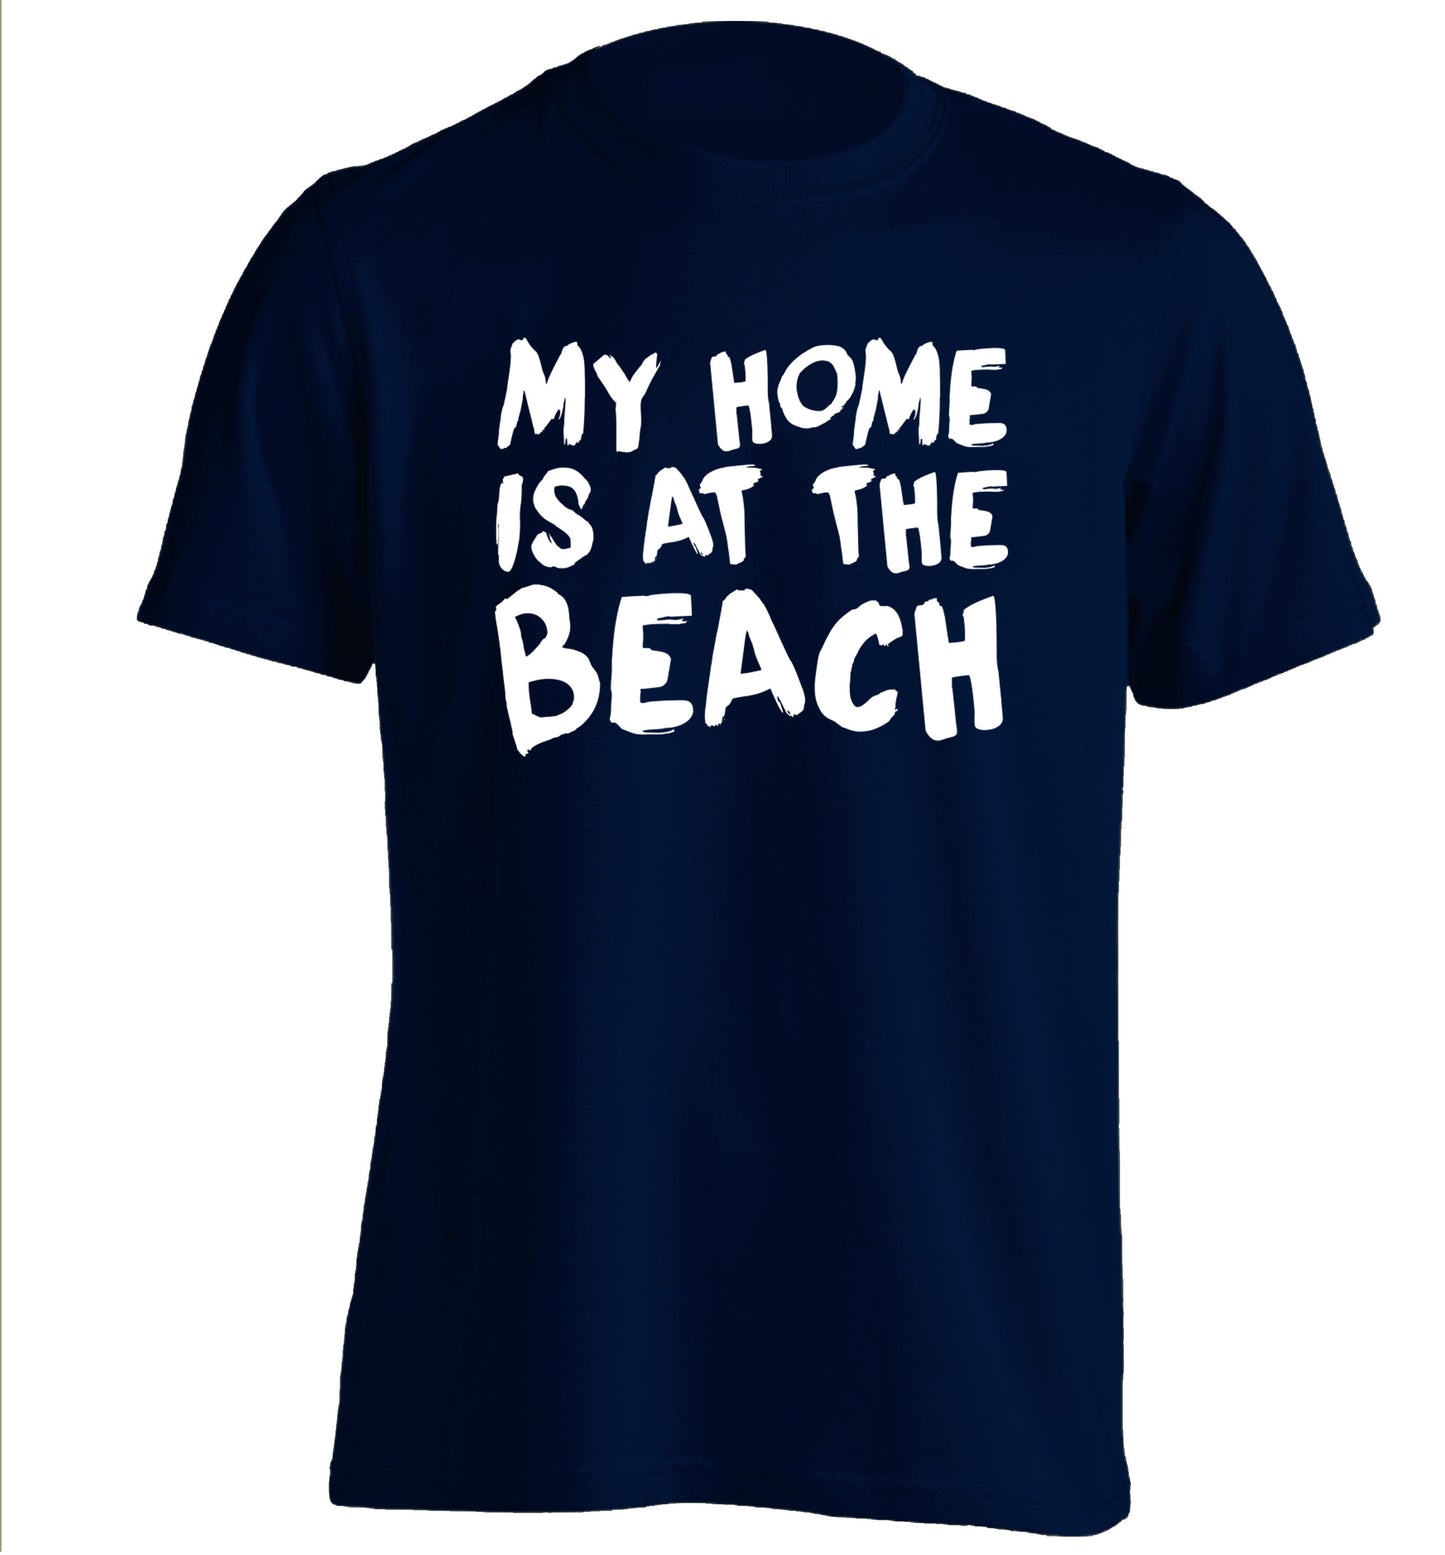 My home is at the beach adults unisex navy Tshirt 2XL